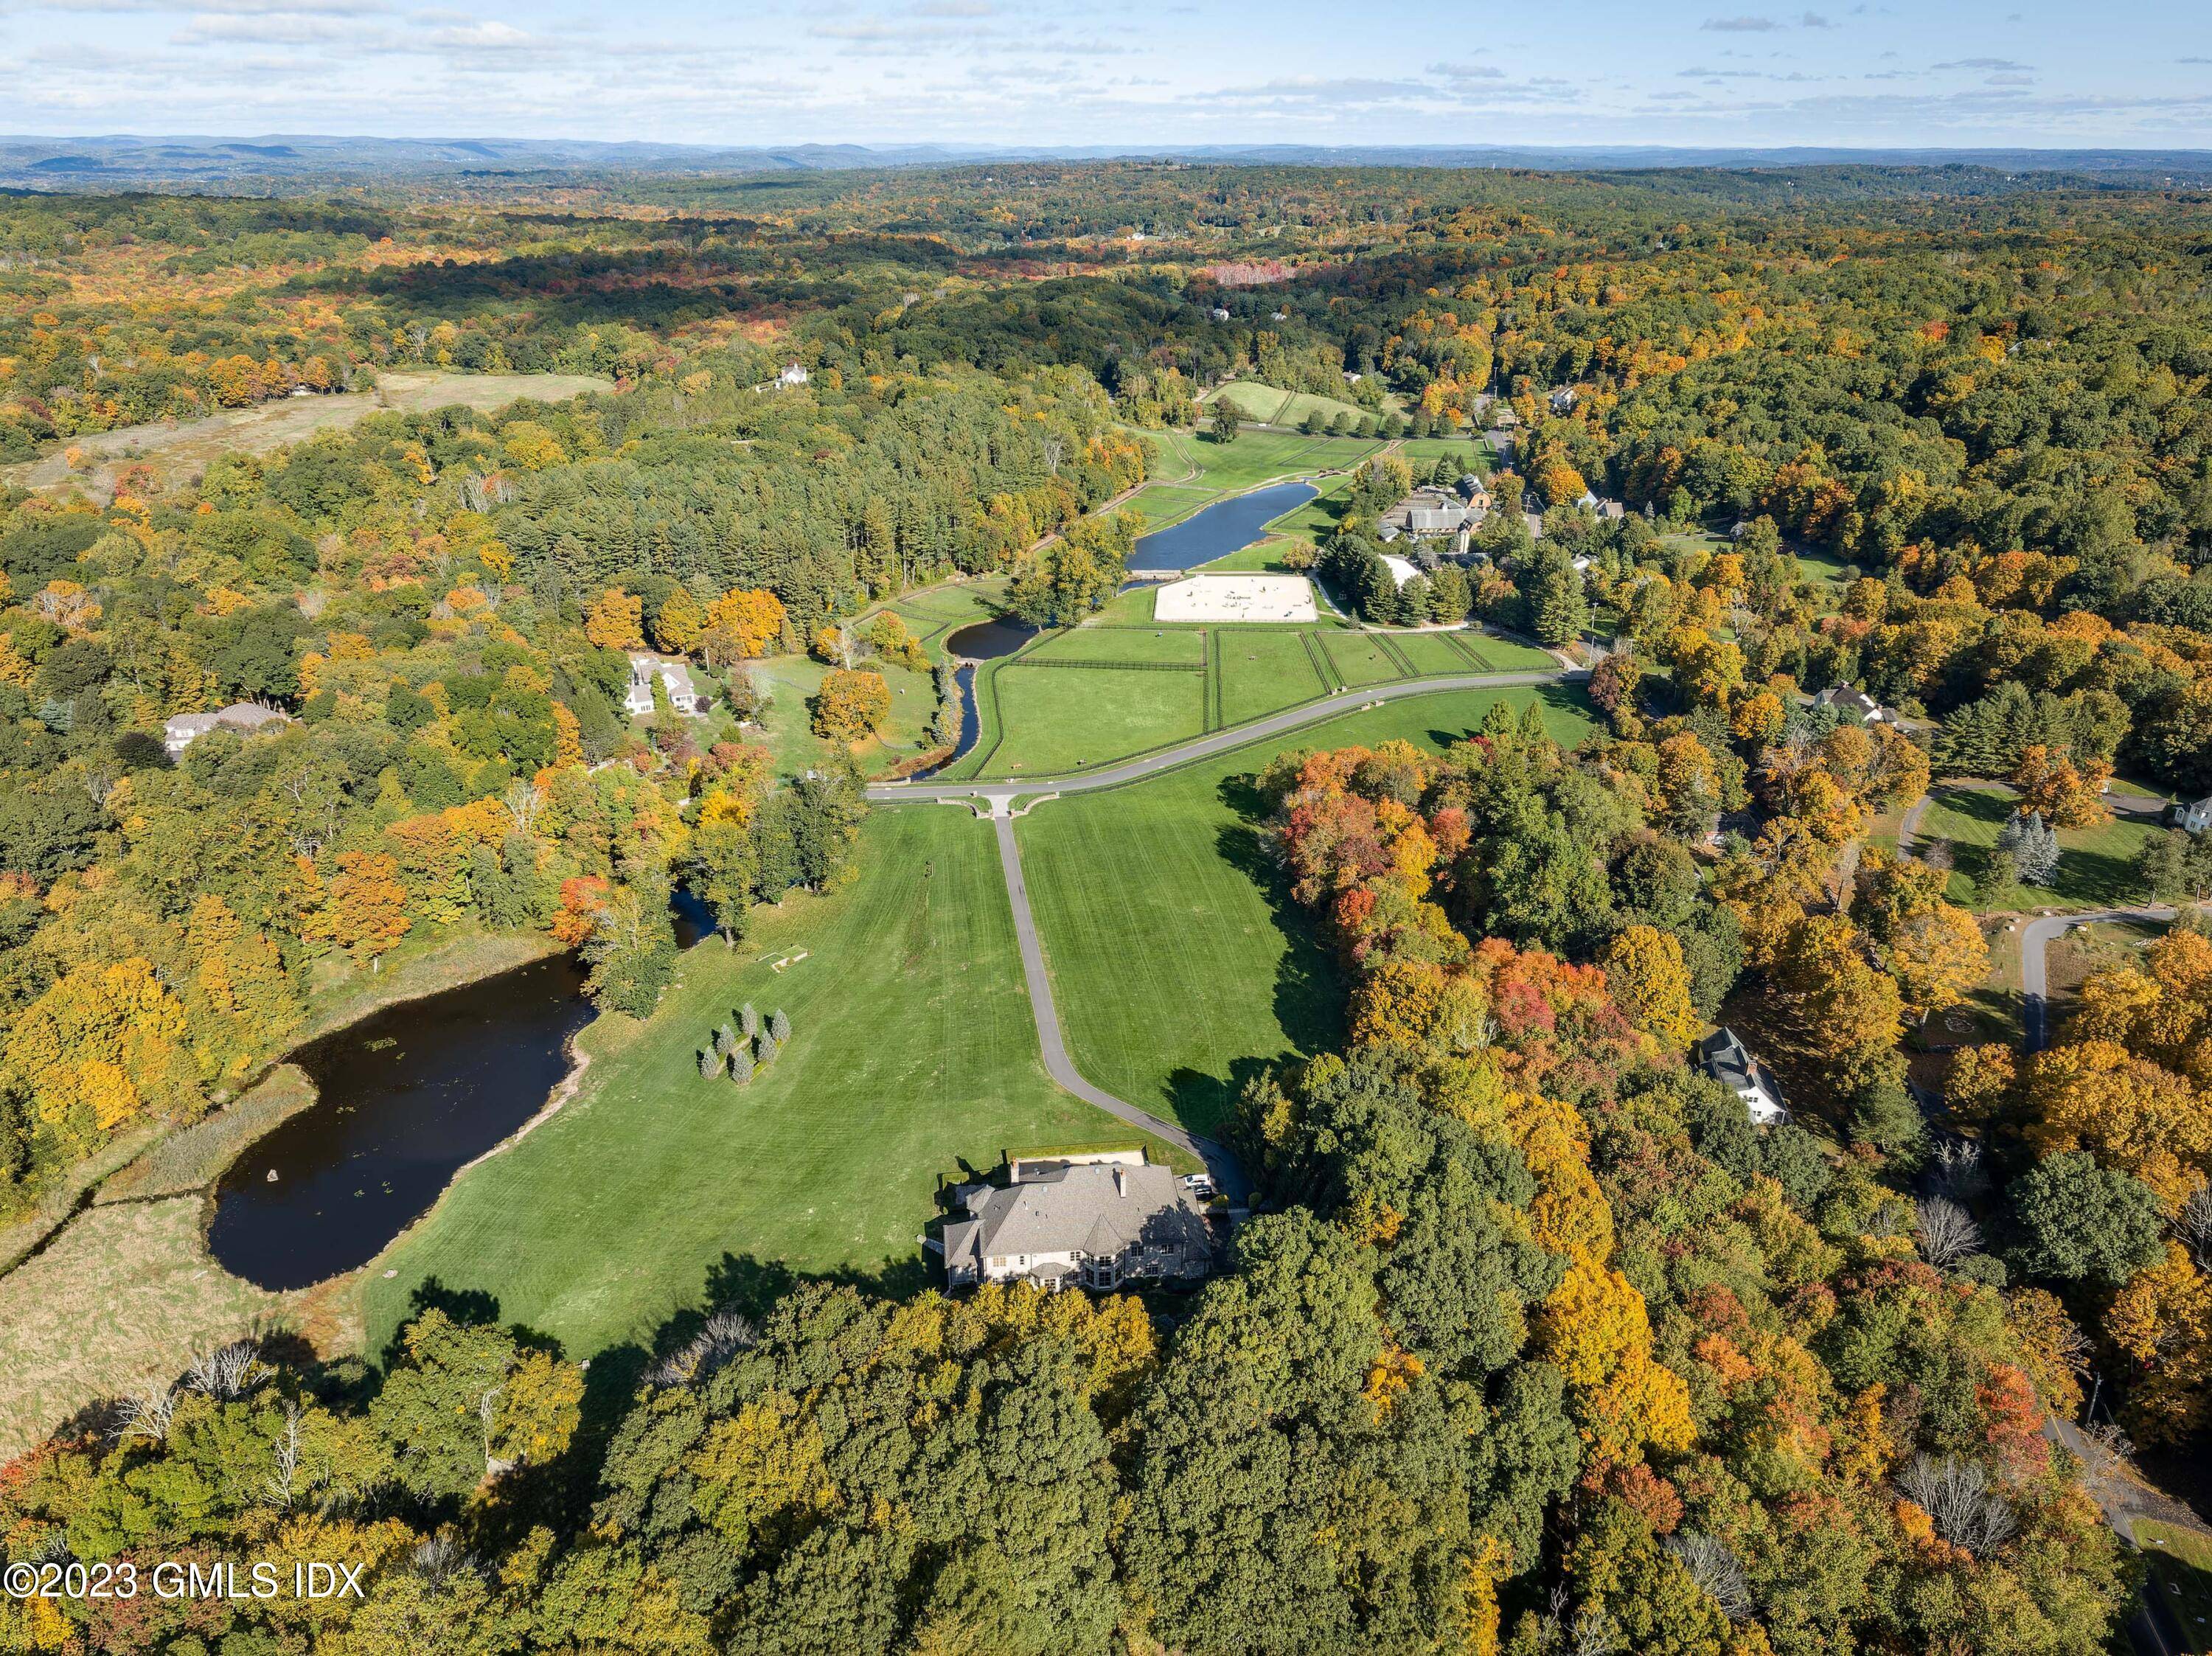 Red Gate Farm A rare opportunity to acquire a TURN KEY equestrian property in Fairfield County with a main house set high overlooking the 54 bucolic acres and the Aspetuck ...